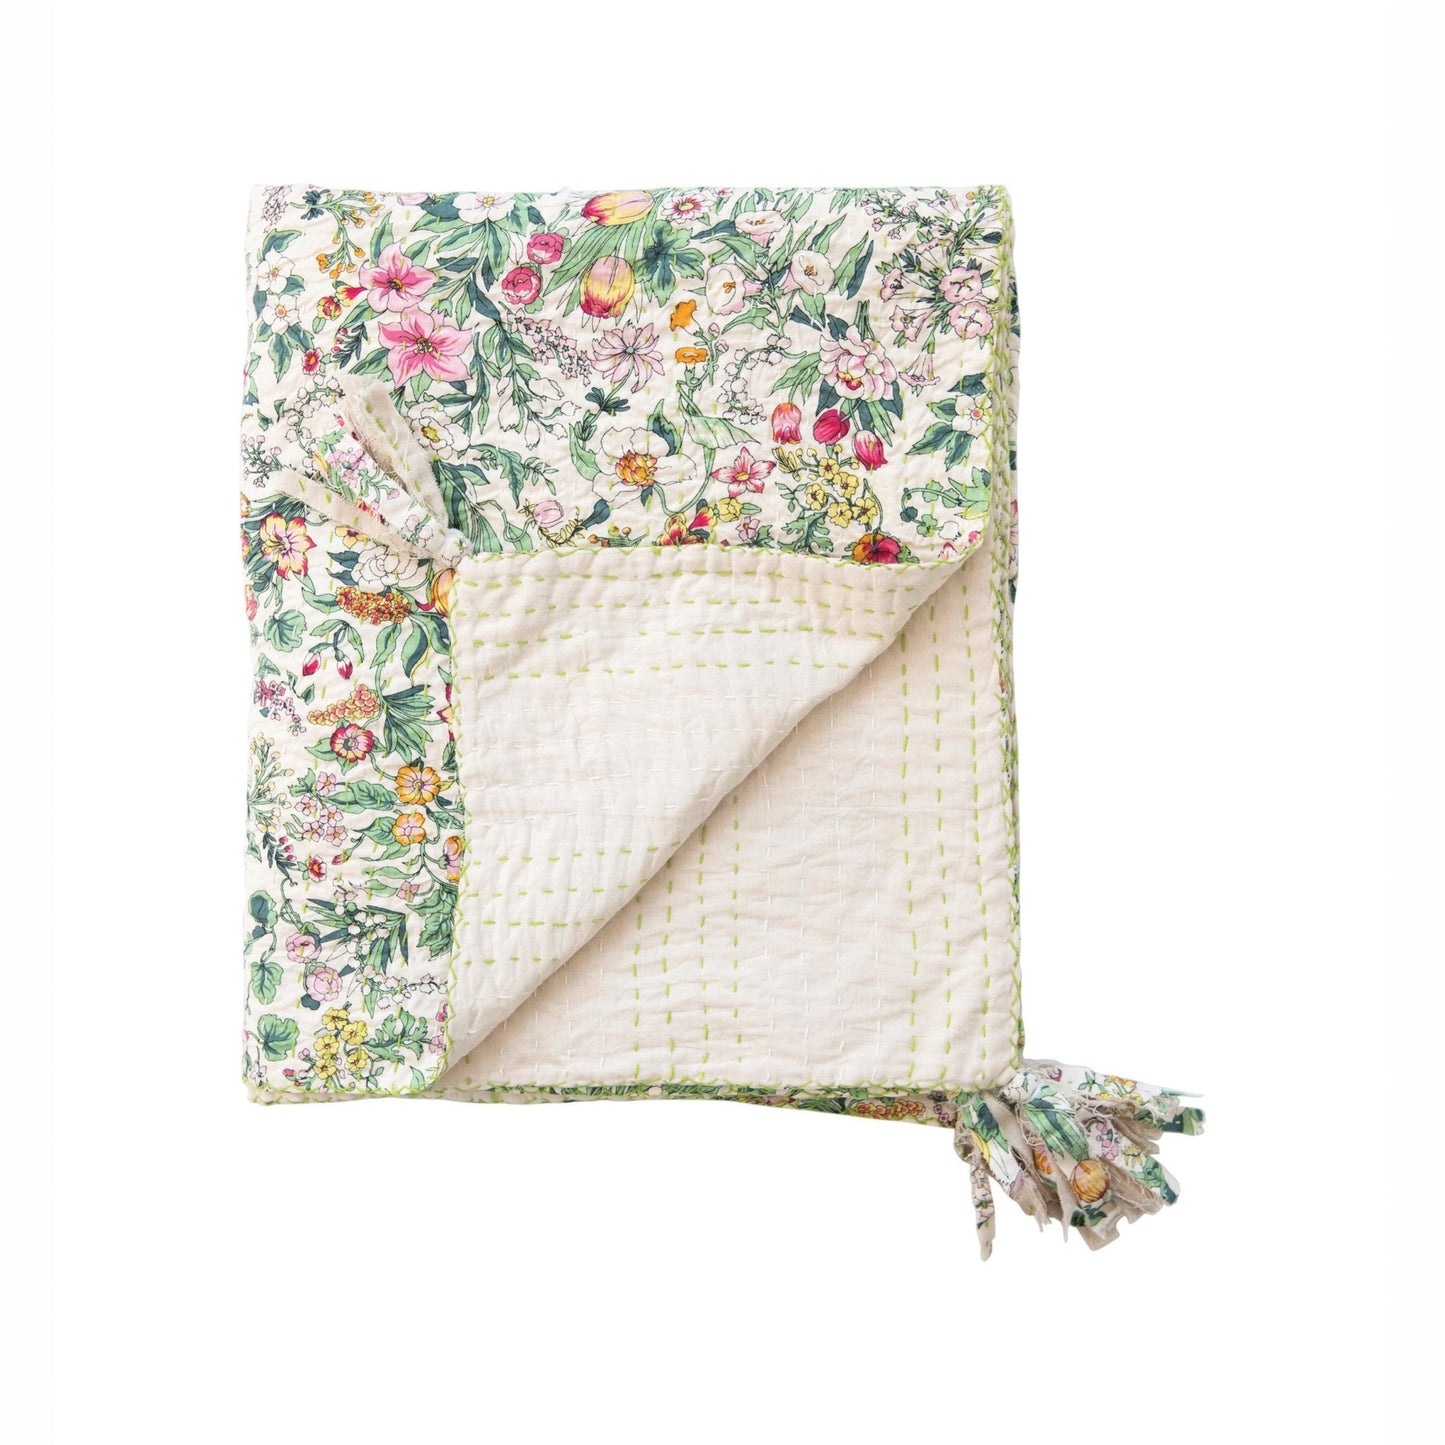 Quilted Cotton Throw with Floral Pattern - Royalties